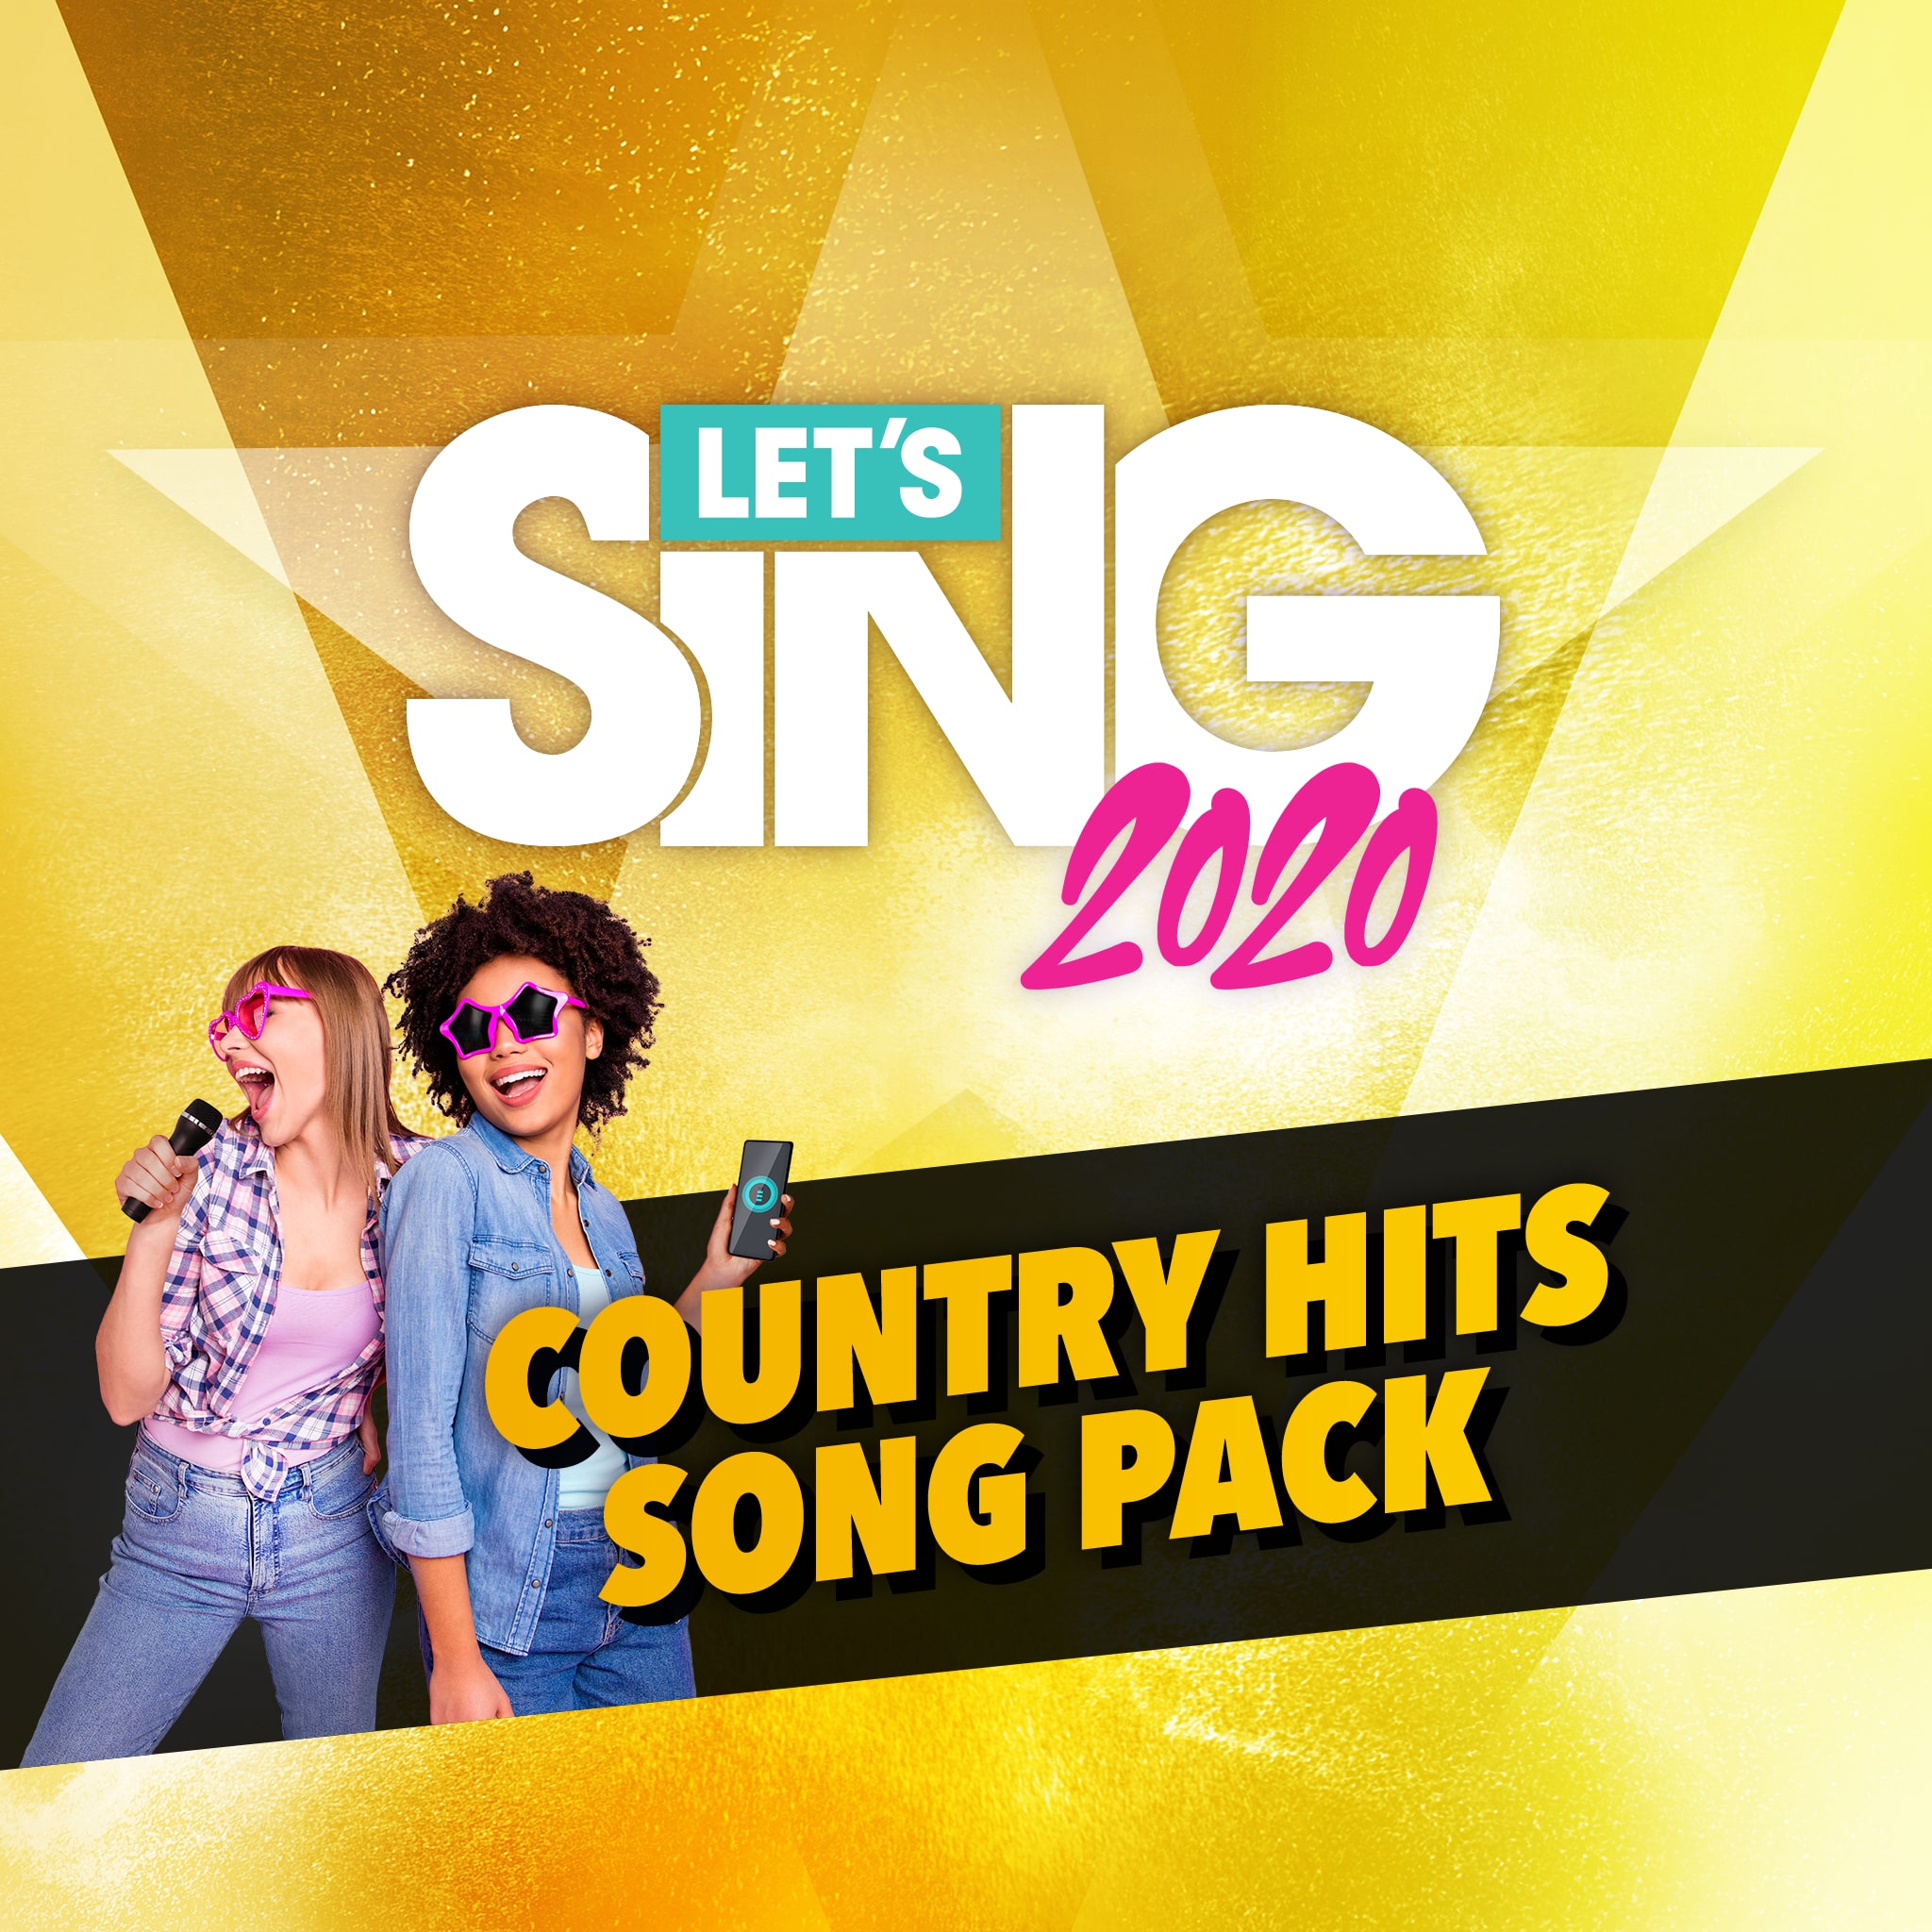 Let's Sing 2020 - Country Hits Song Pack